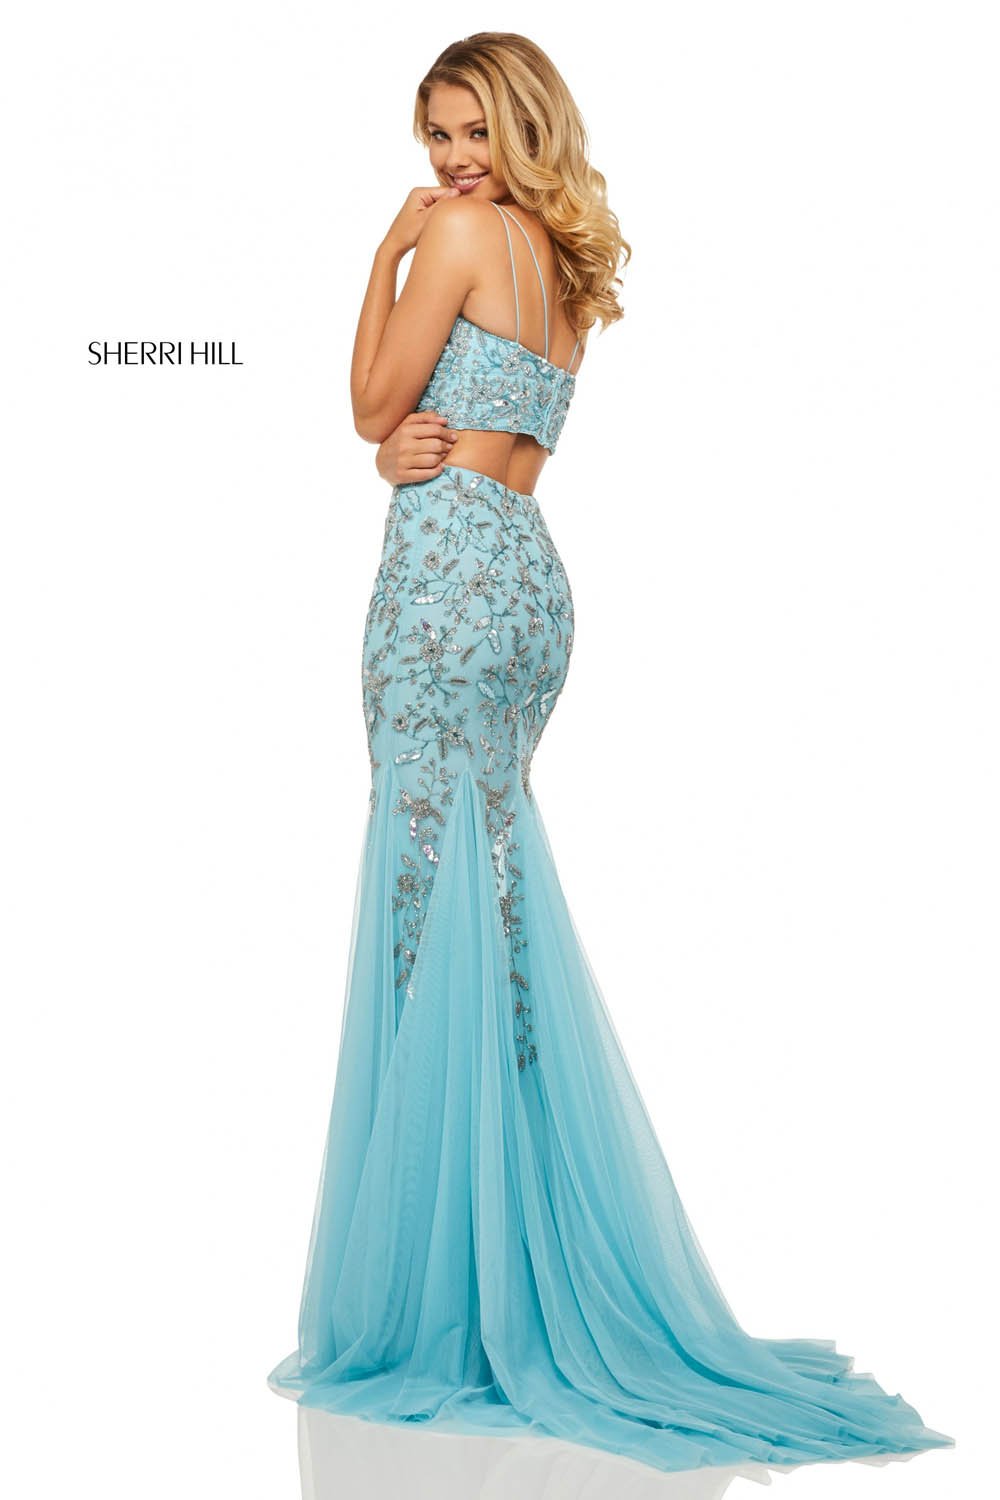 Sherri Hill 52808 dress images in these colors: Light Pink, Light Yellow, Light Blue.